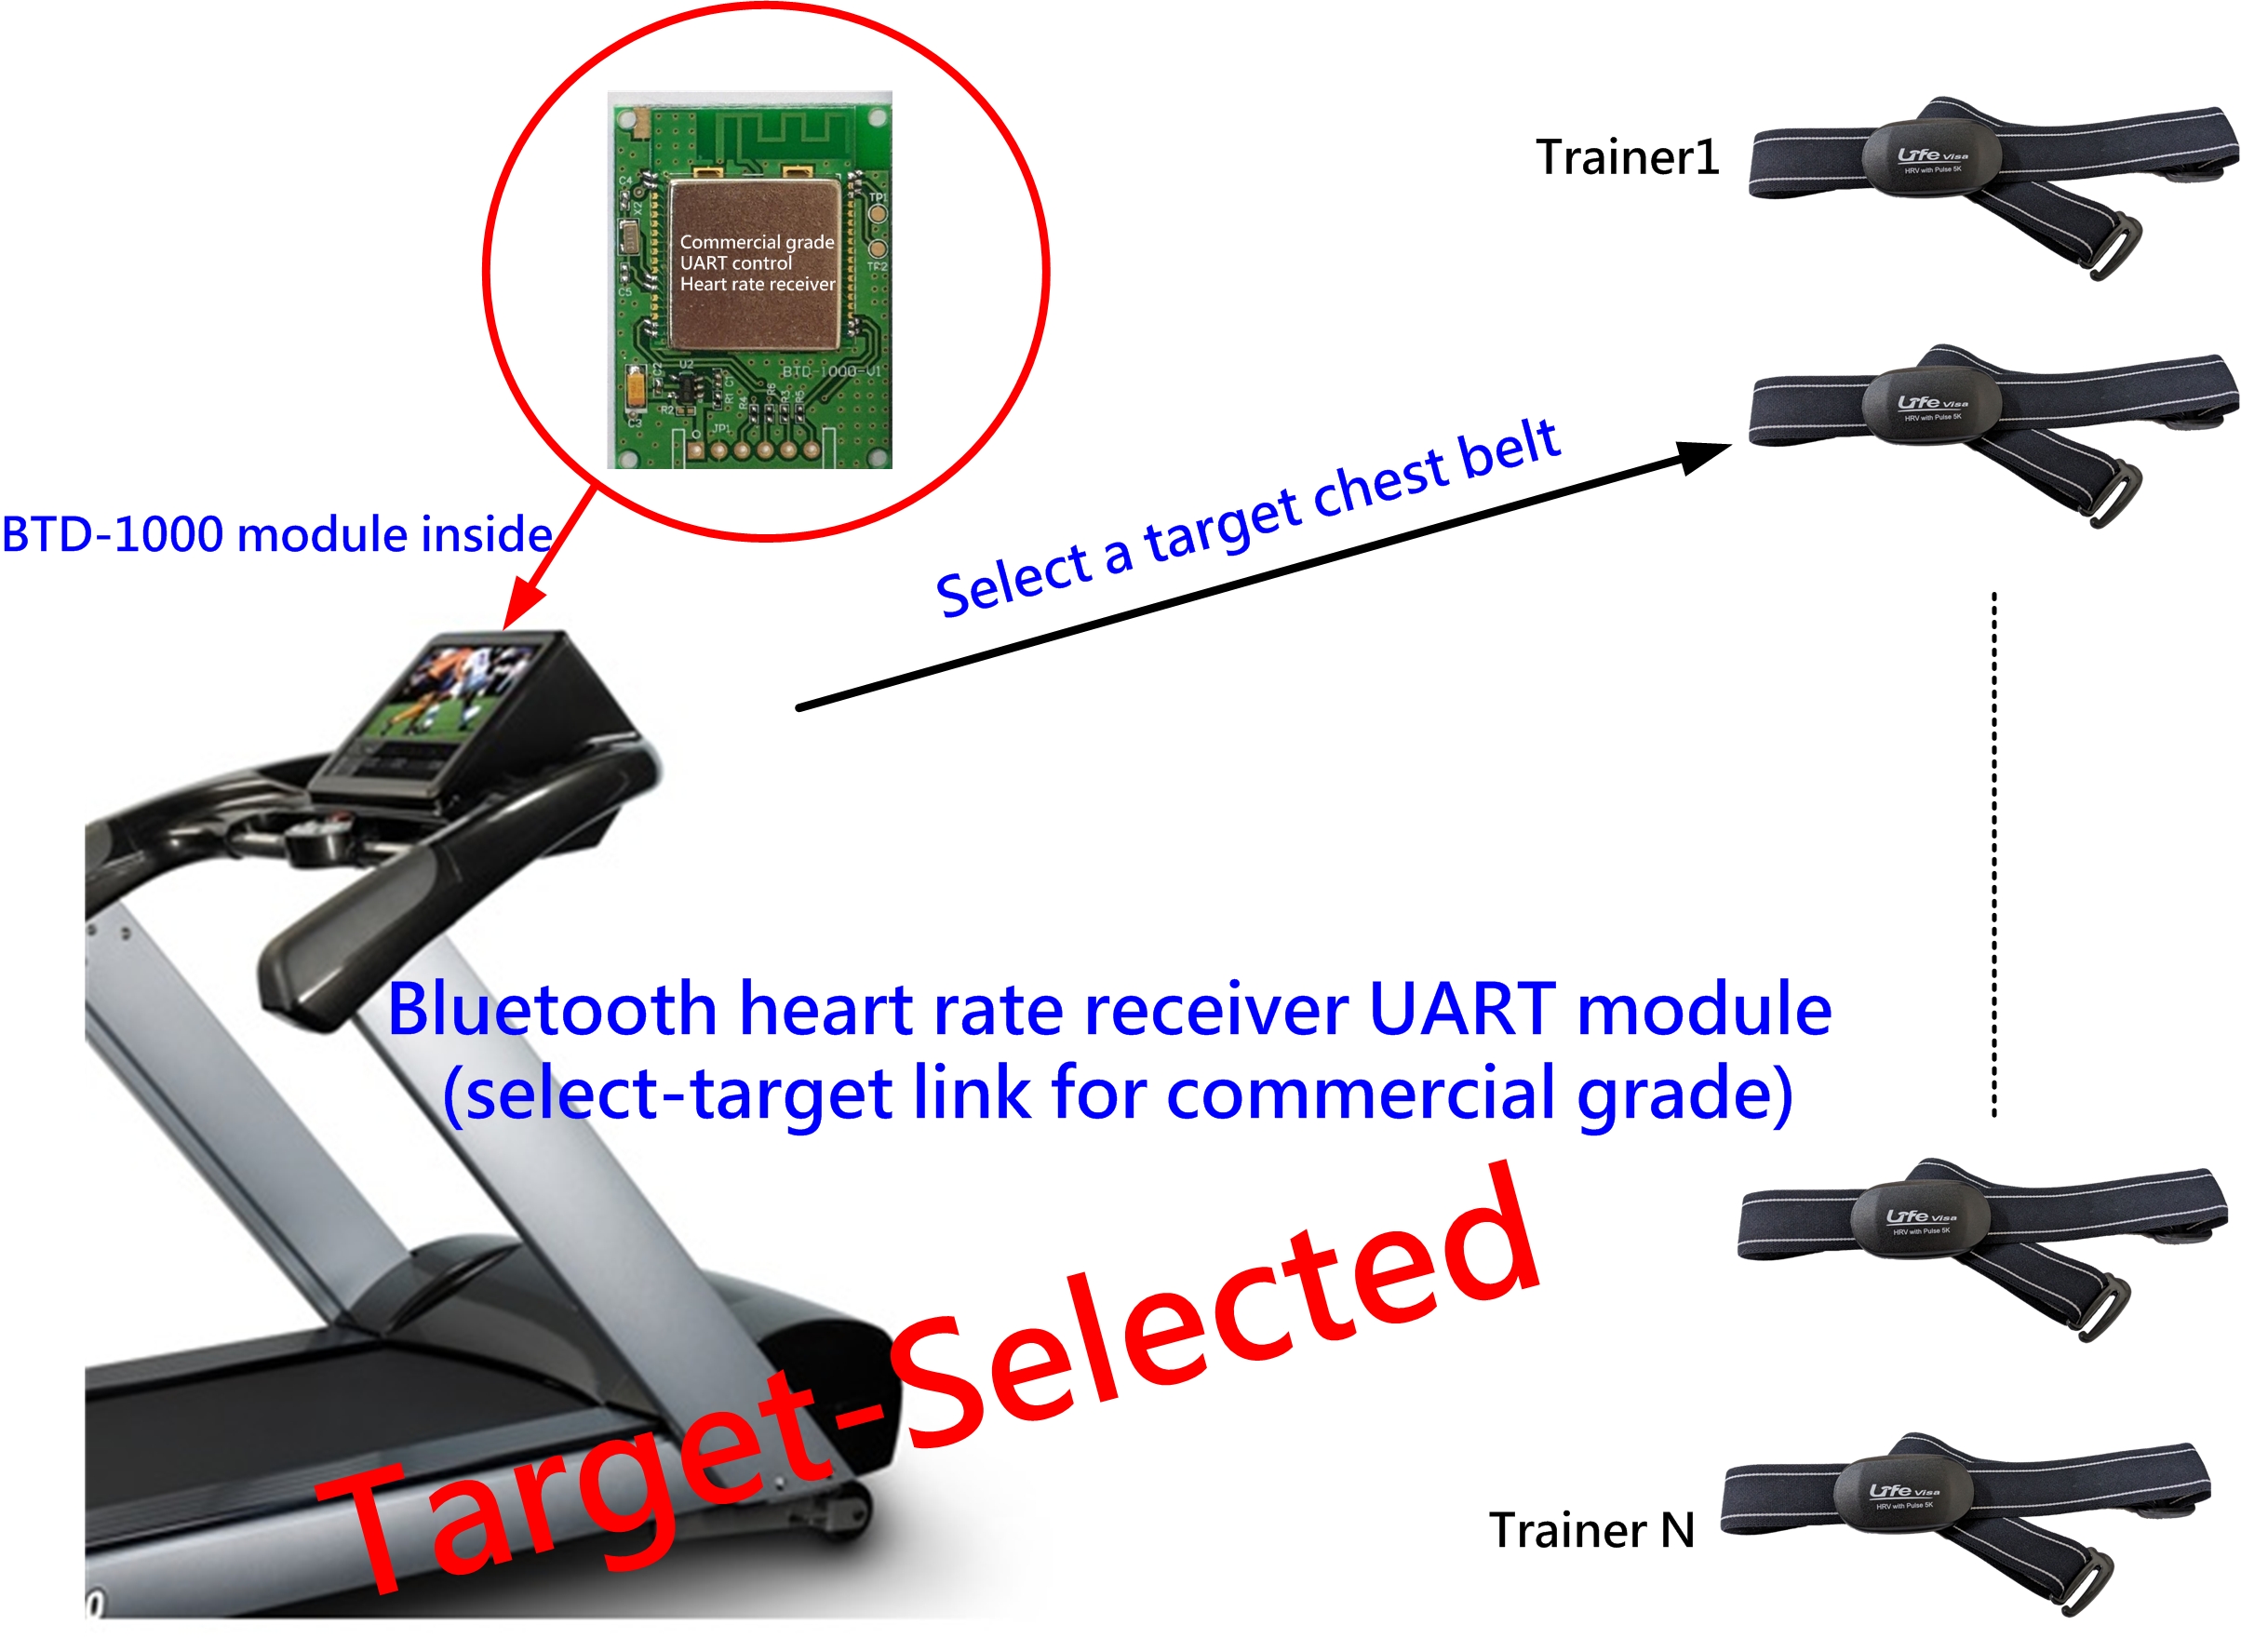 Bluetooth heart rate receiver UART module (select-target link for commercial grade)